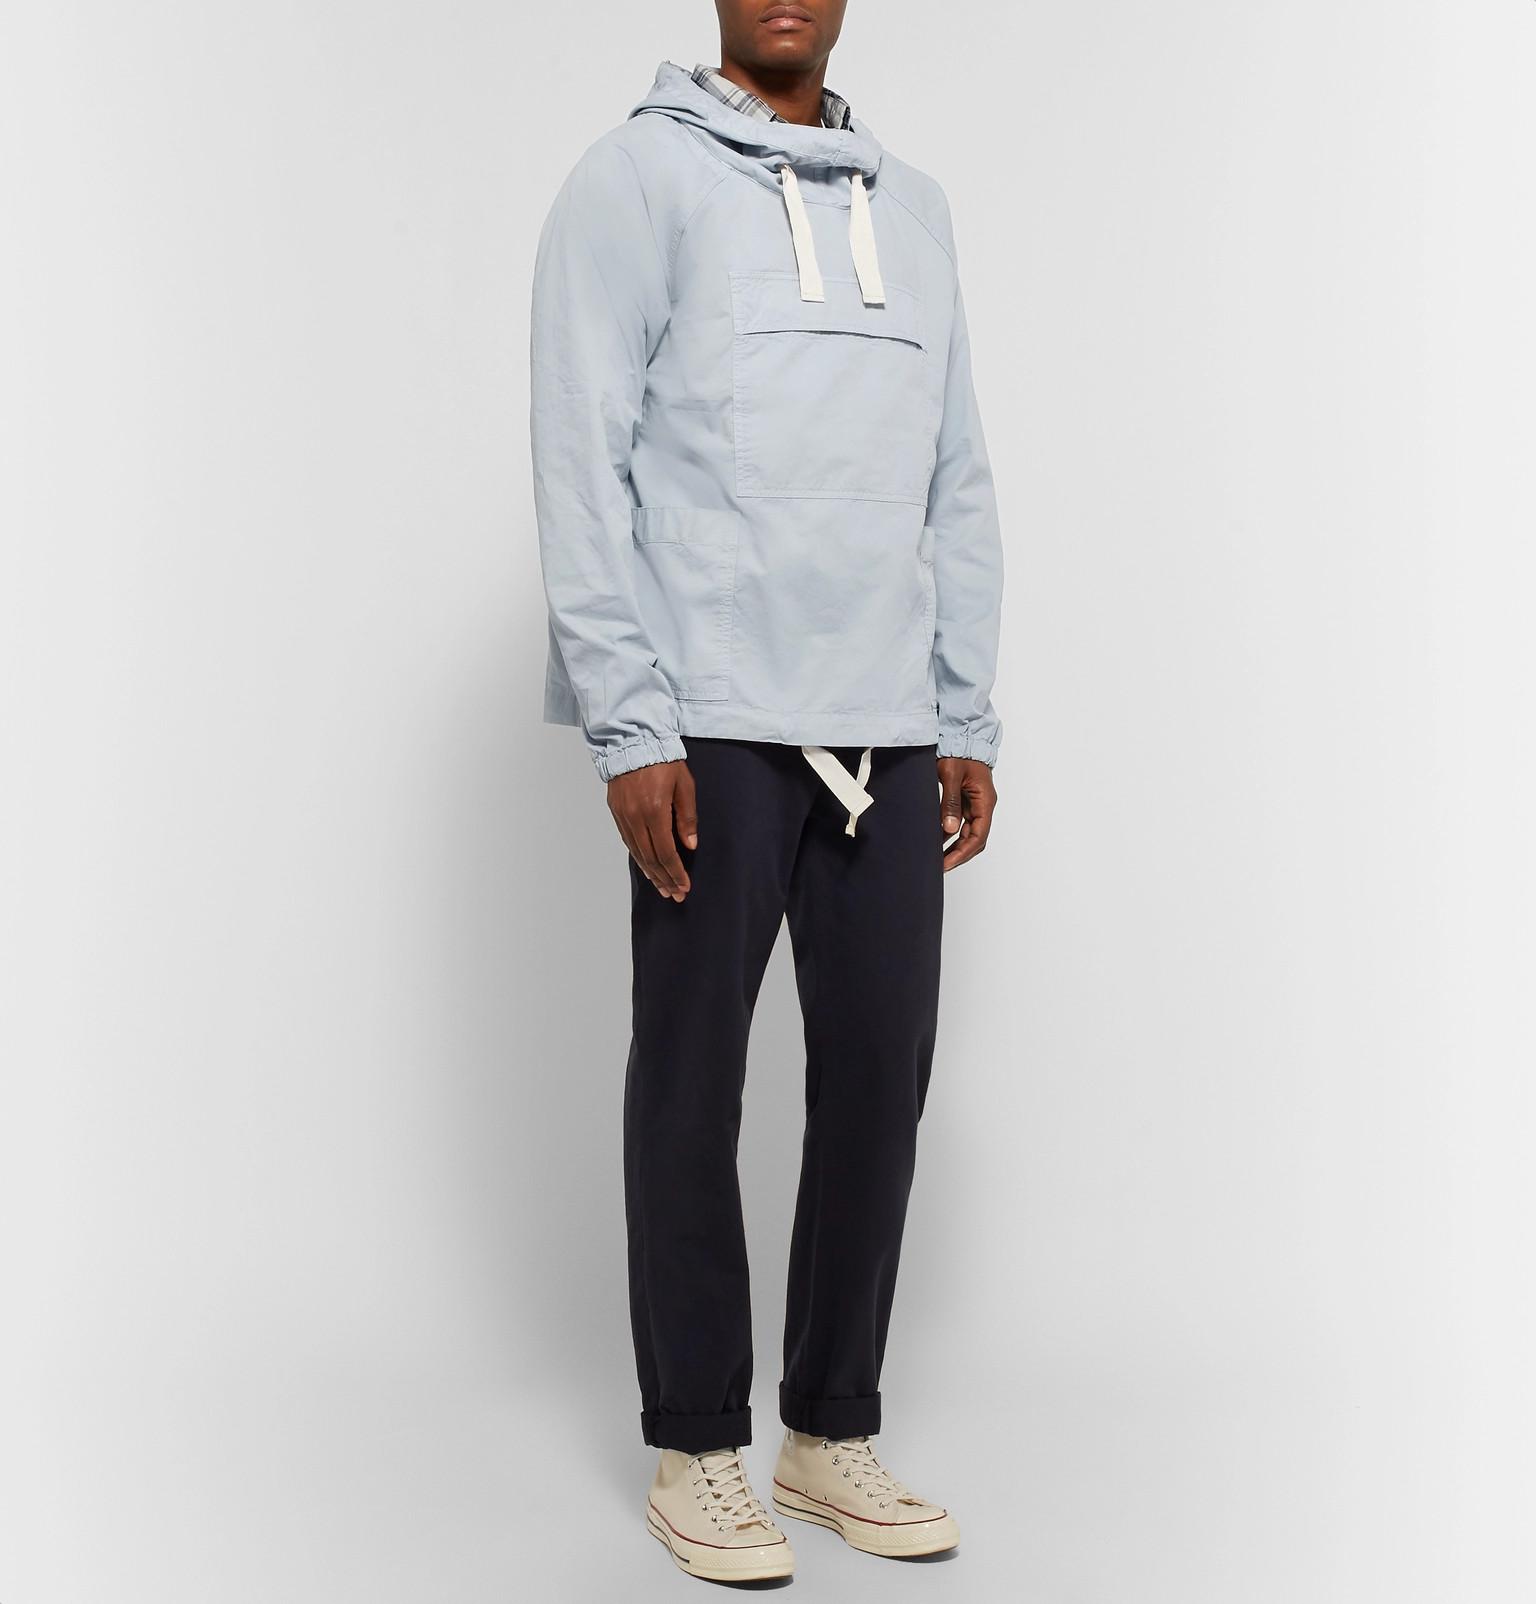 Albam Sailing Smock Cotton-twill Hooded Jacket in Blue for Men - Lyst